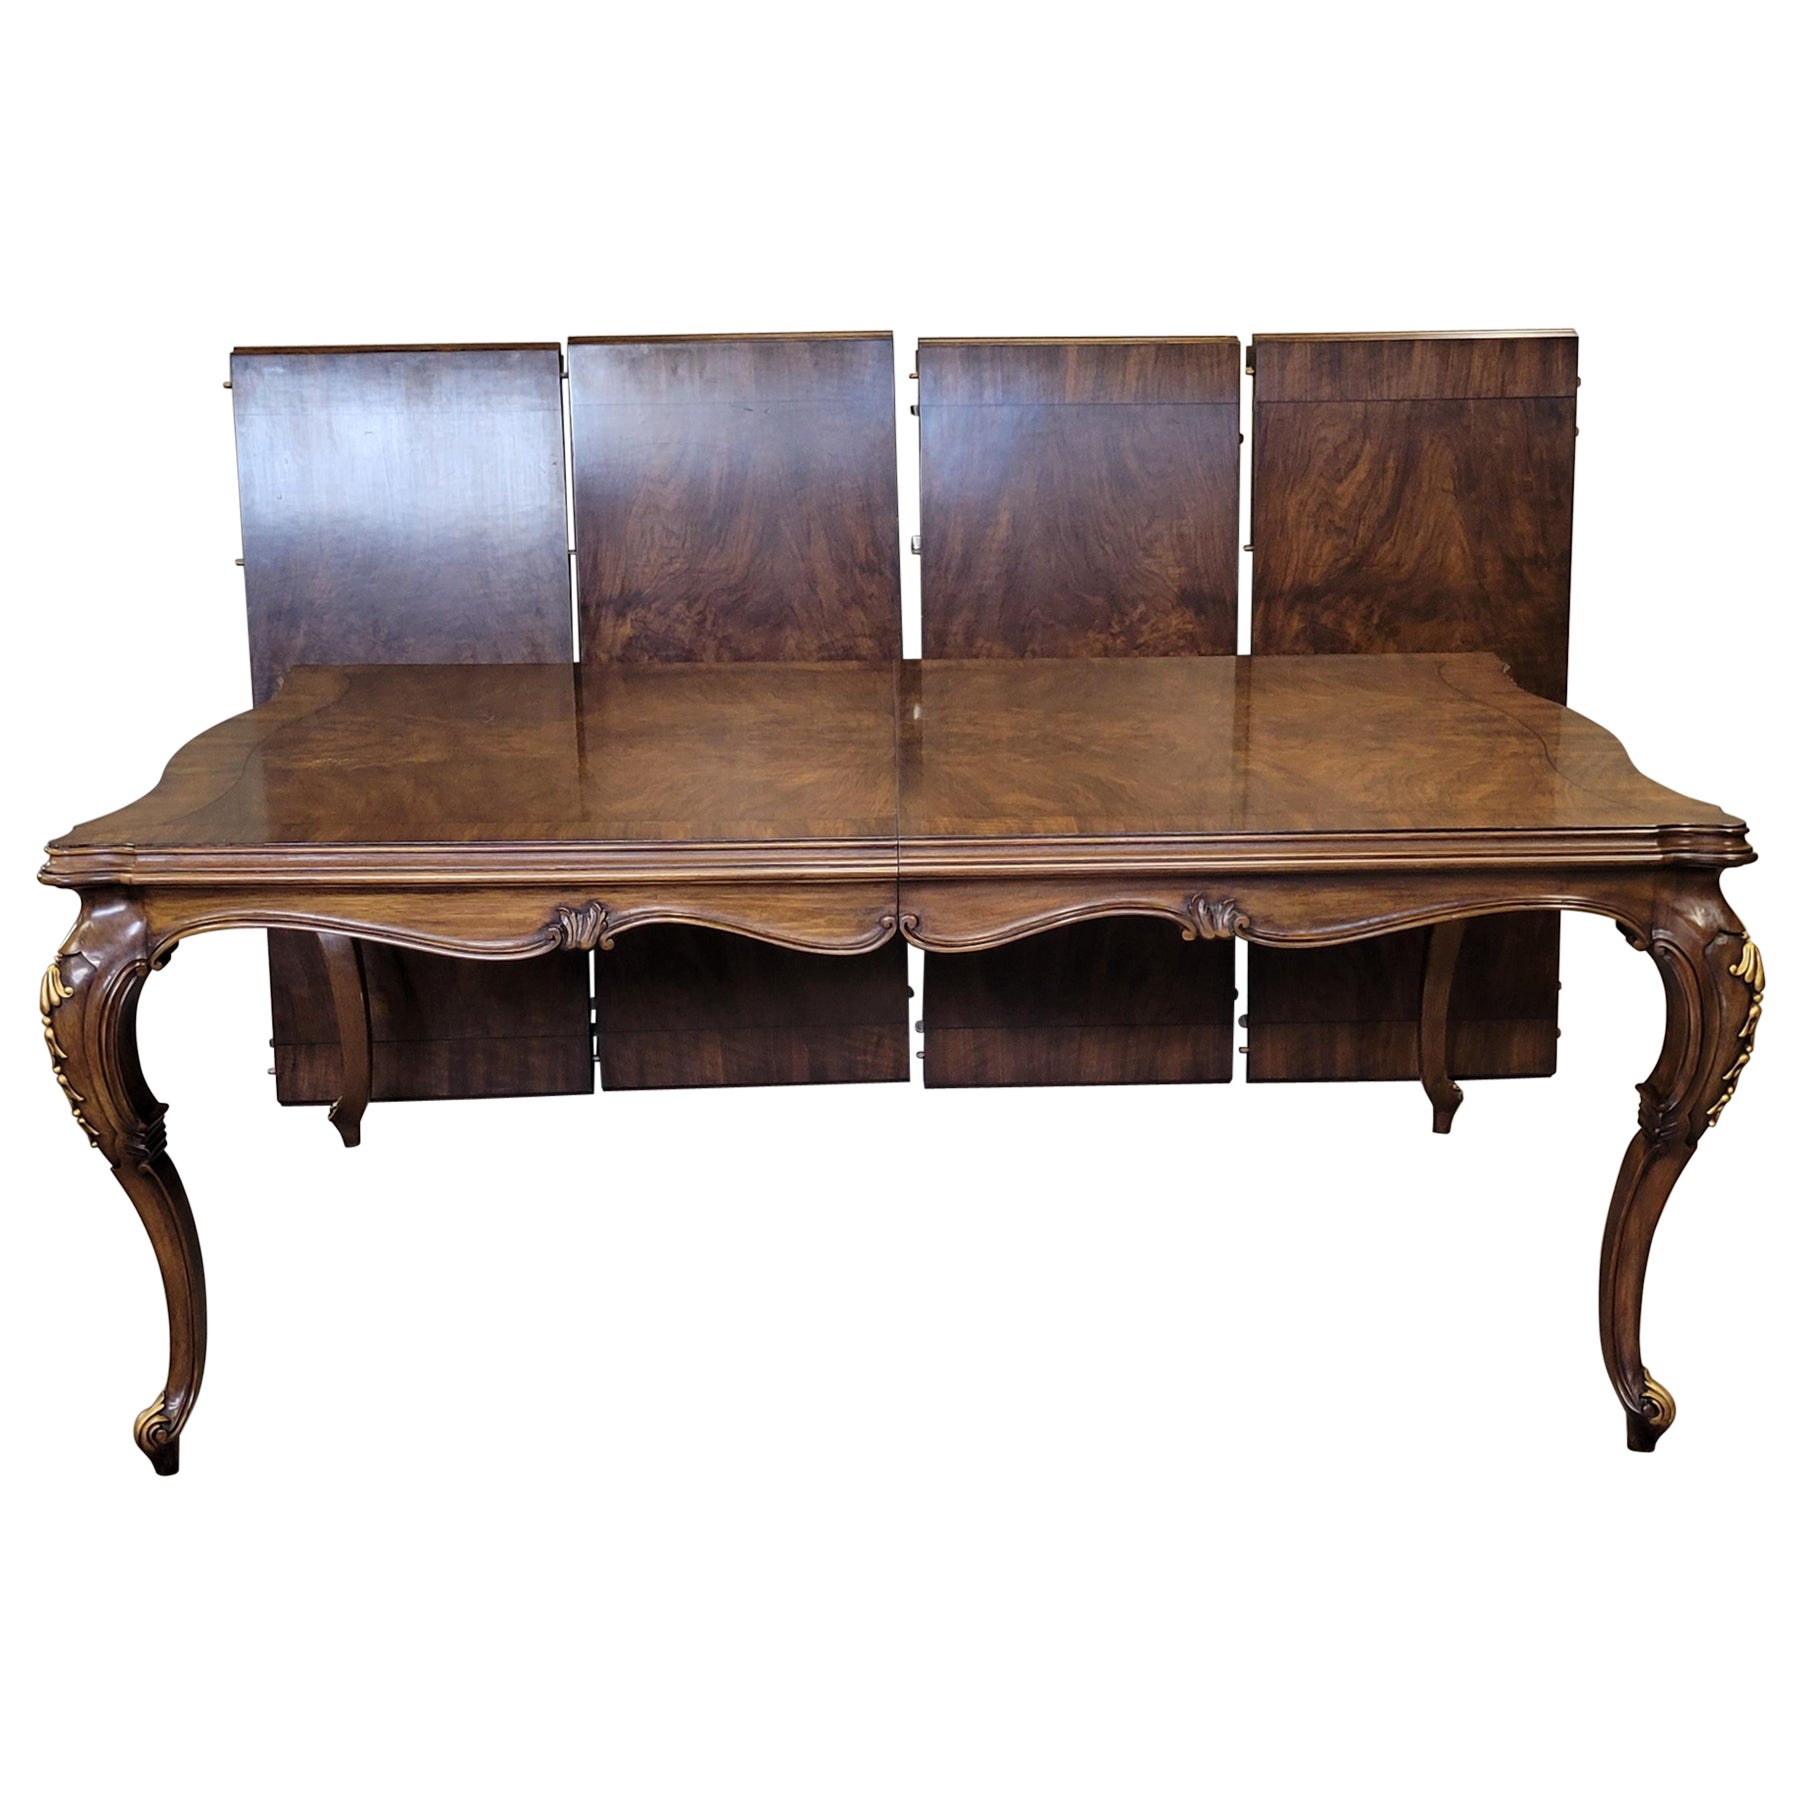 Vintage Karges French Louis XV Burl Walnut Dining Room Table With Four Leaves